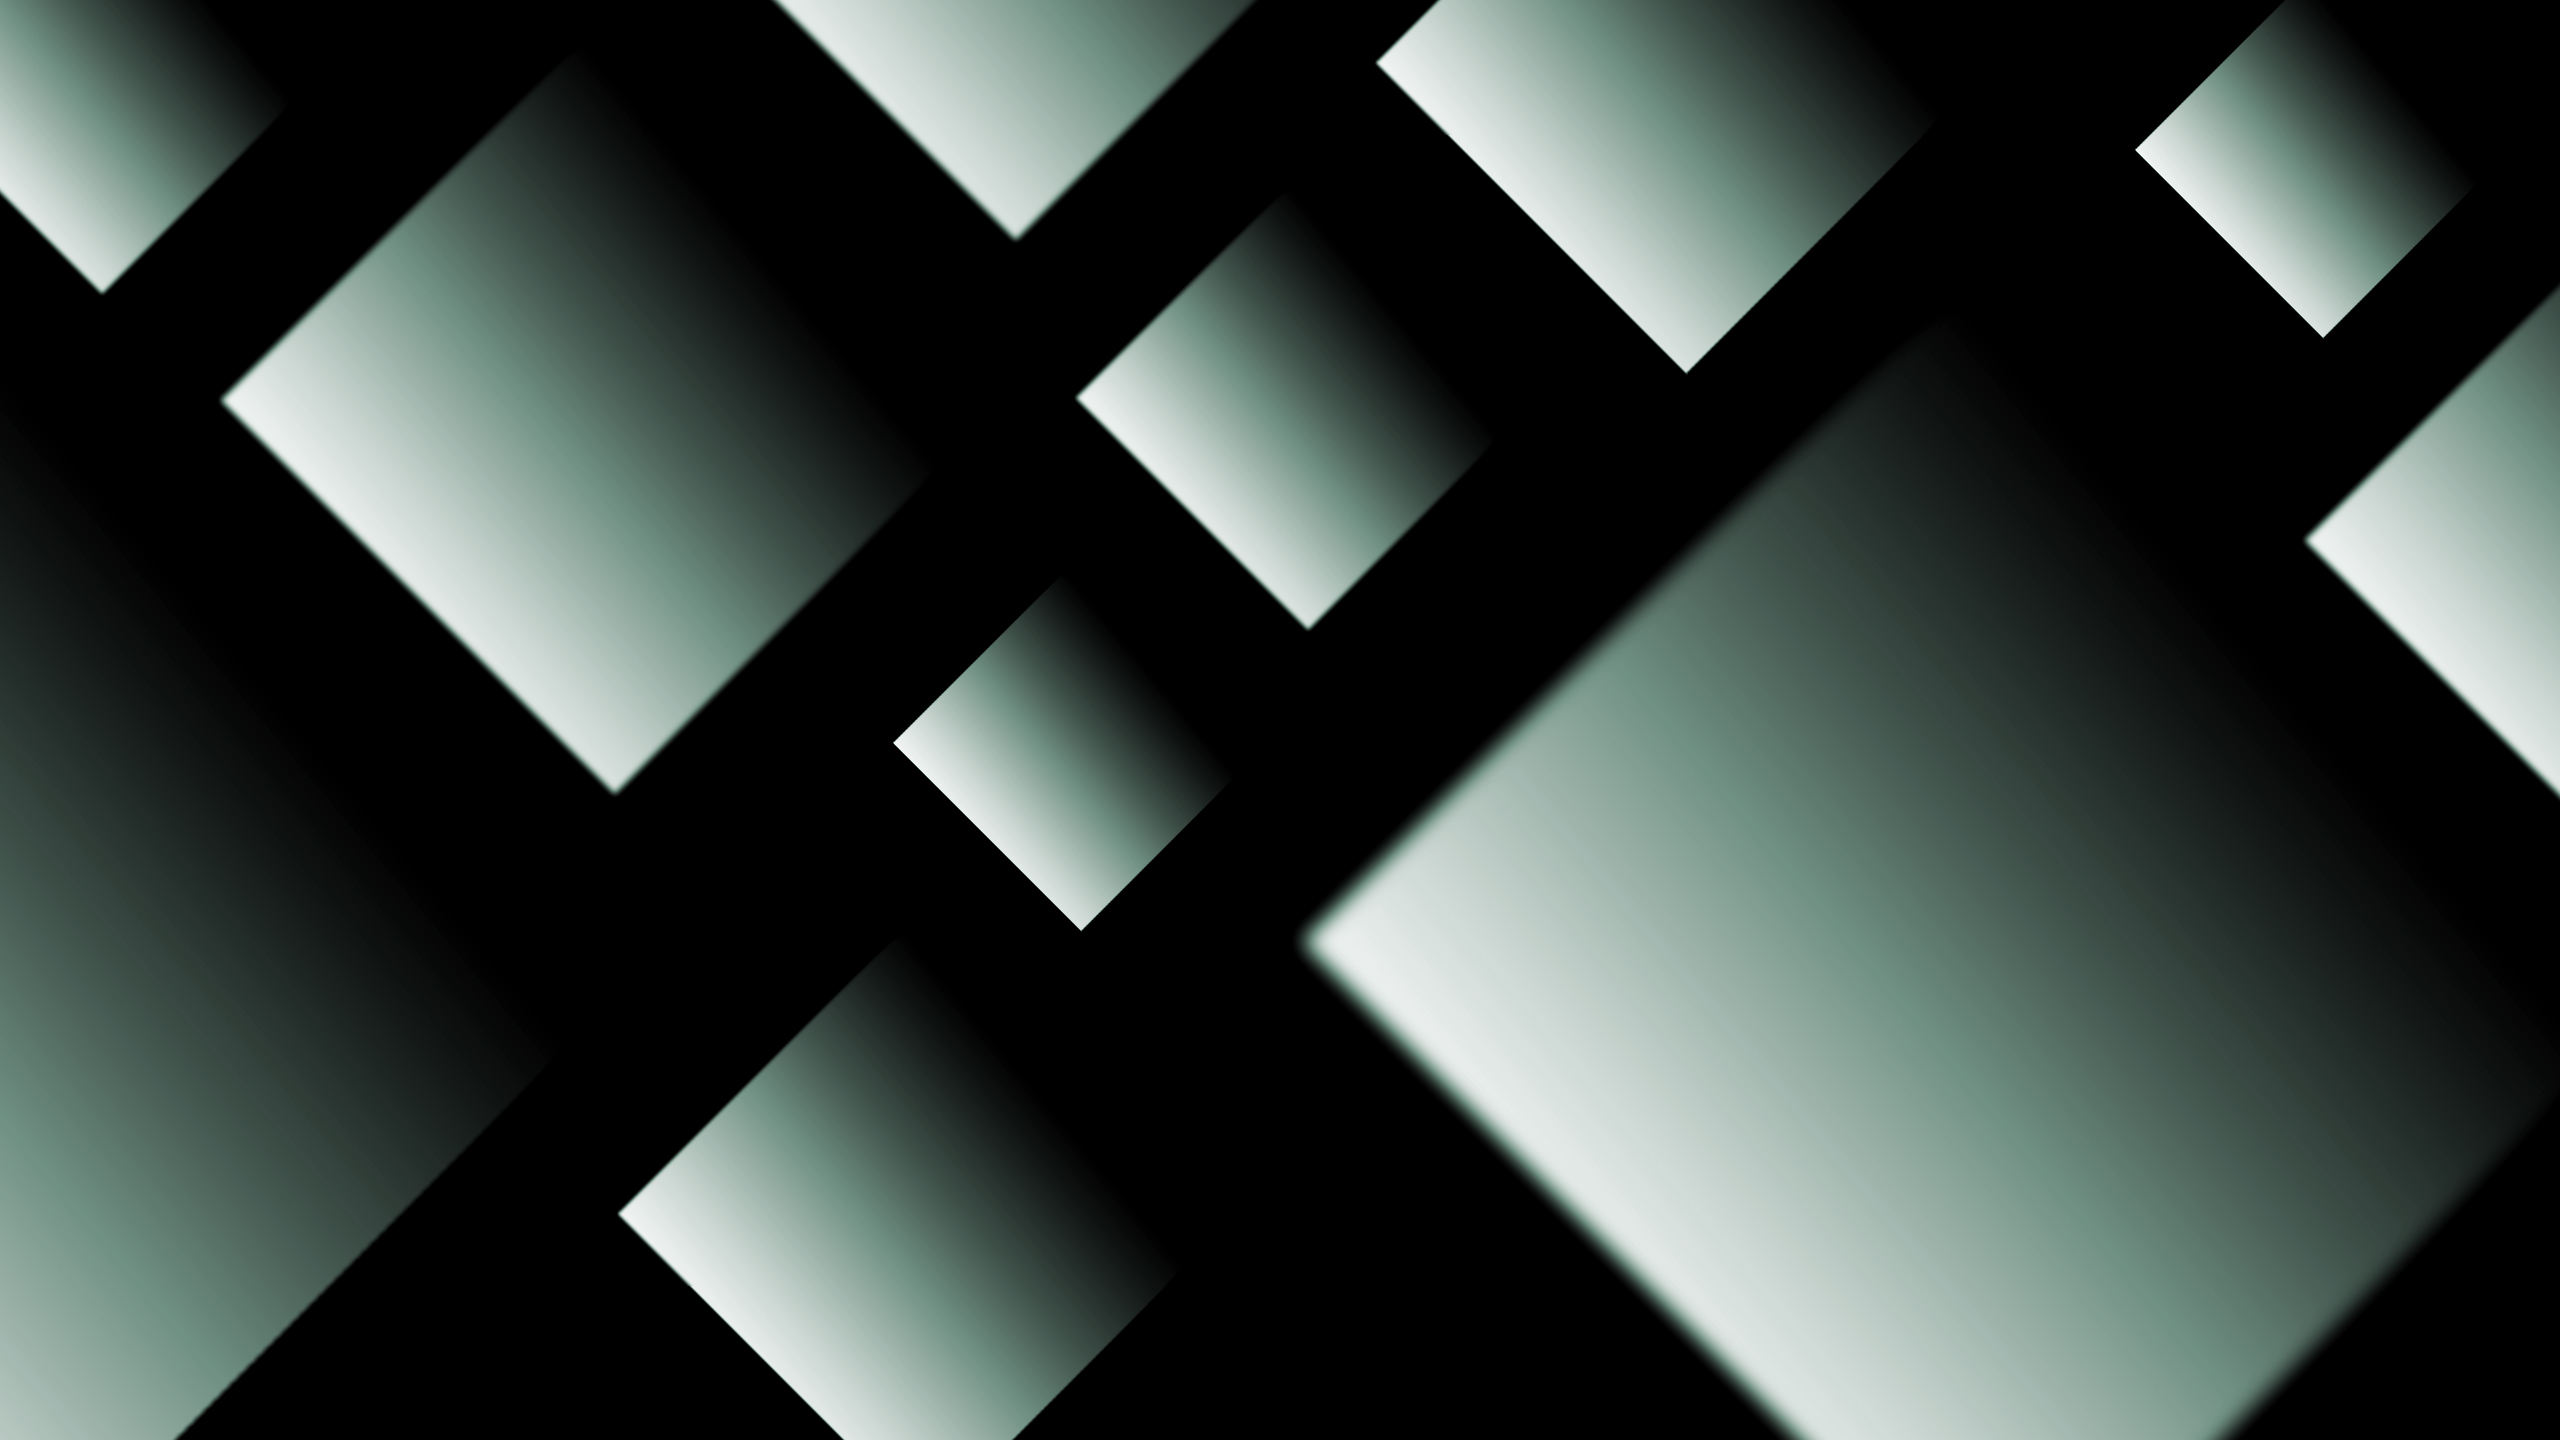 geometry, abstract, black & white, black, cube, grey, shadow, white